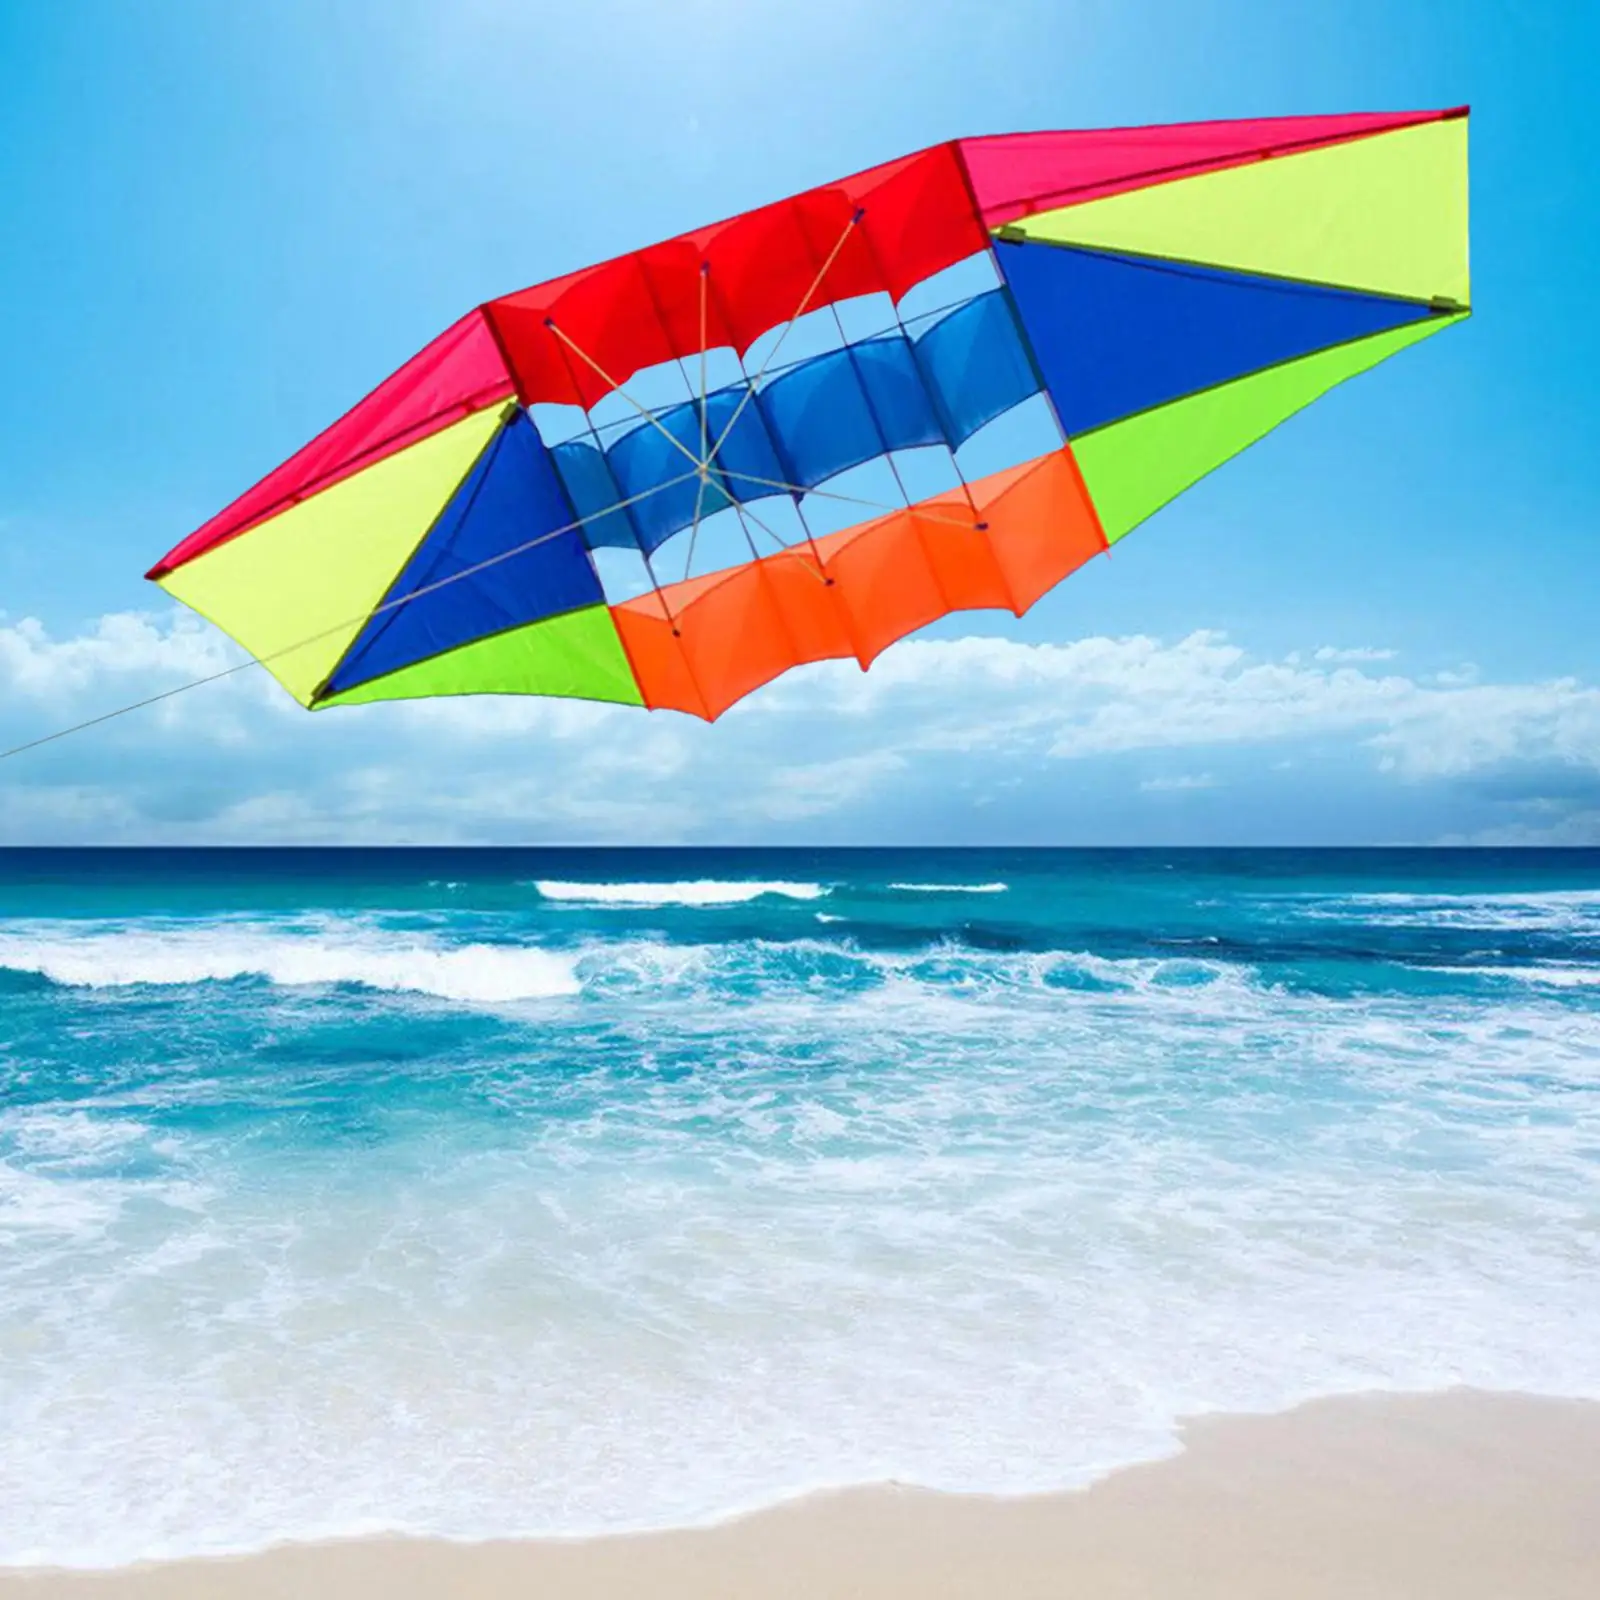 250Cmx80cm Surfing Beach s Outdoor Sport Toys Colorful  Toy Single Line s for Children Kids Adults Girls Boys